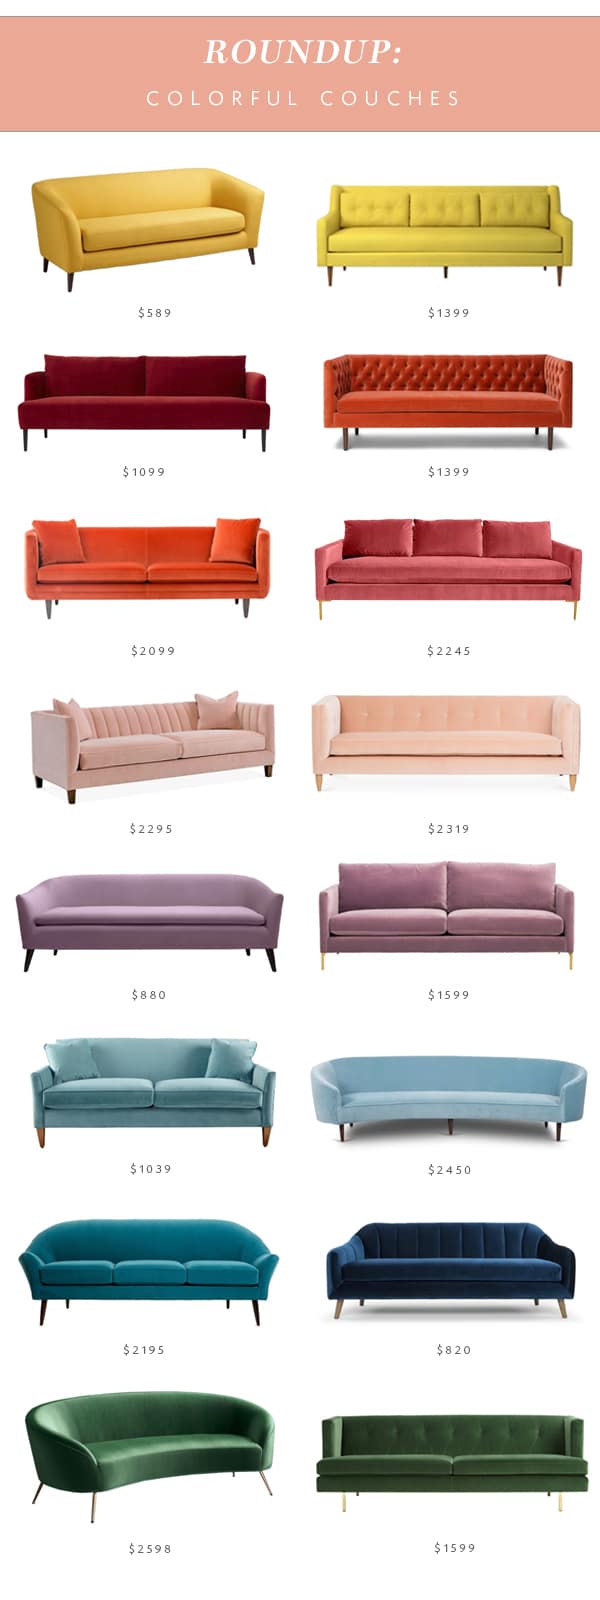 our favorite colorful sofas | roundup on coco kelley 